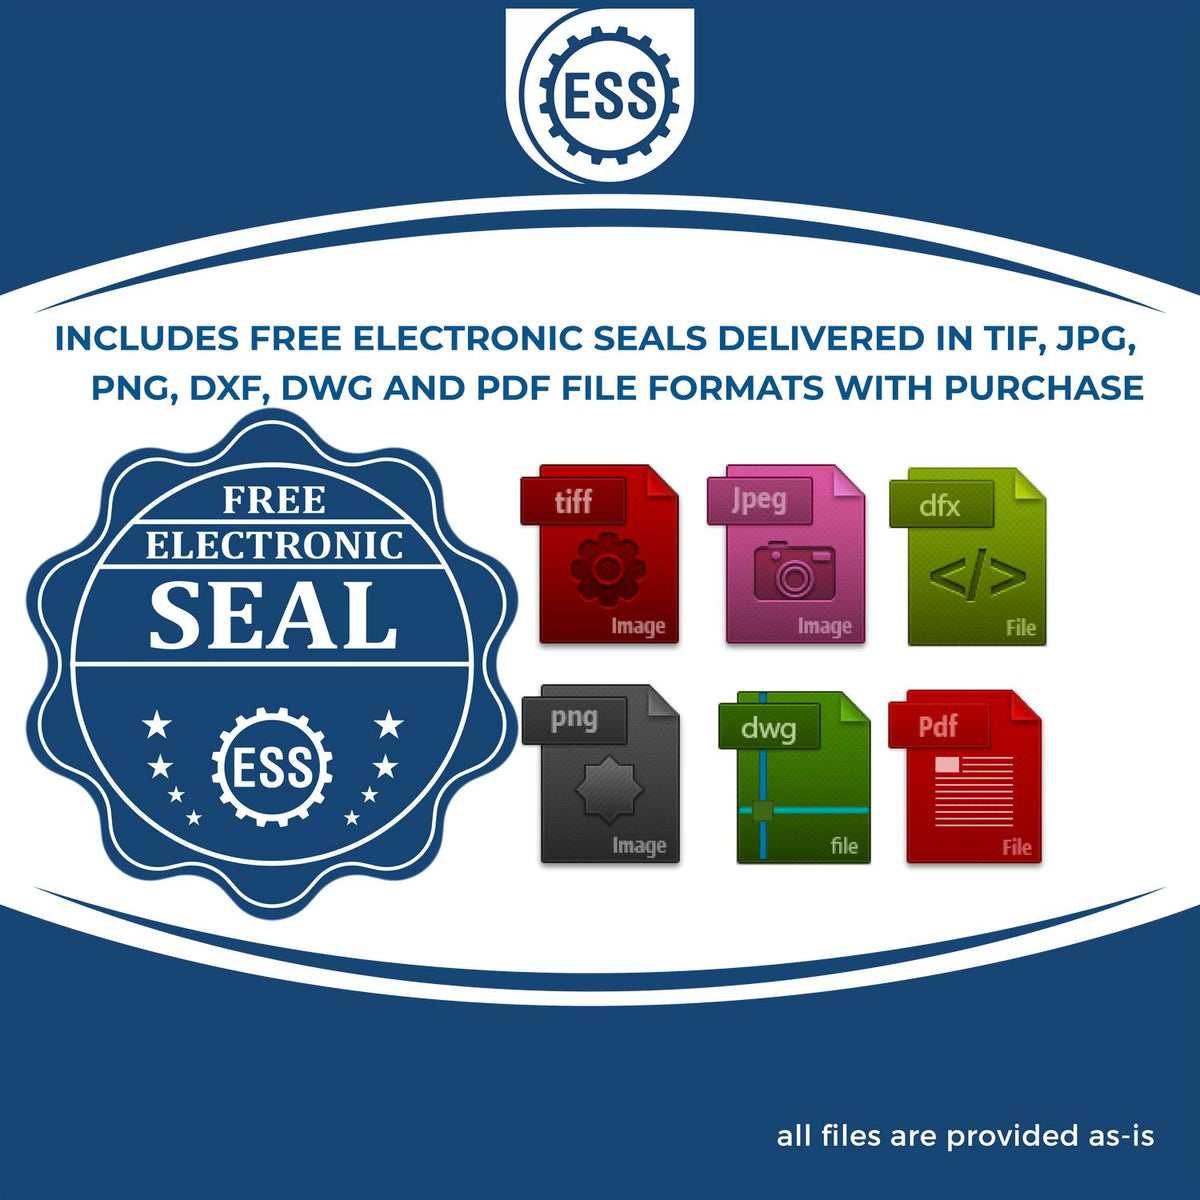 An infographic for the free electronic seal for the Slim Pre-Inked Alabama Landscape Architect Seal Stamp illustrating the different file type icons such as DXF, DWG, TIF, JPG and PNG.